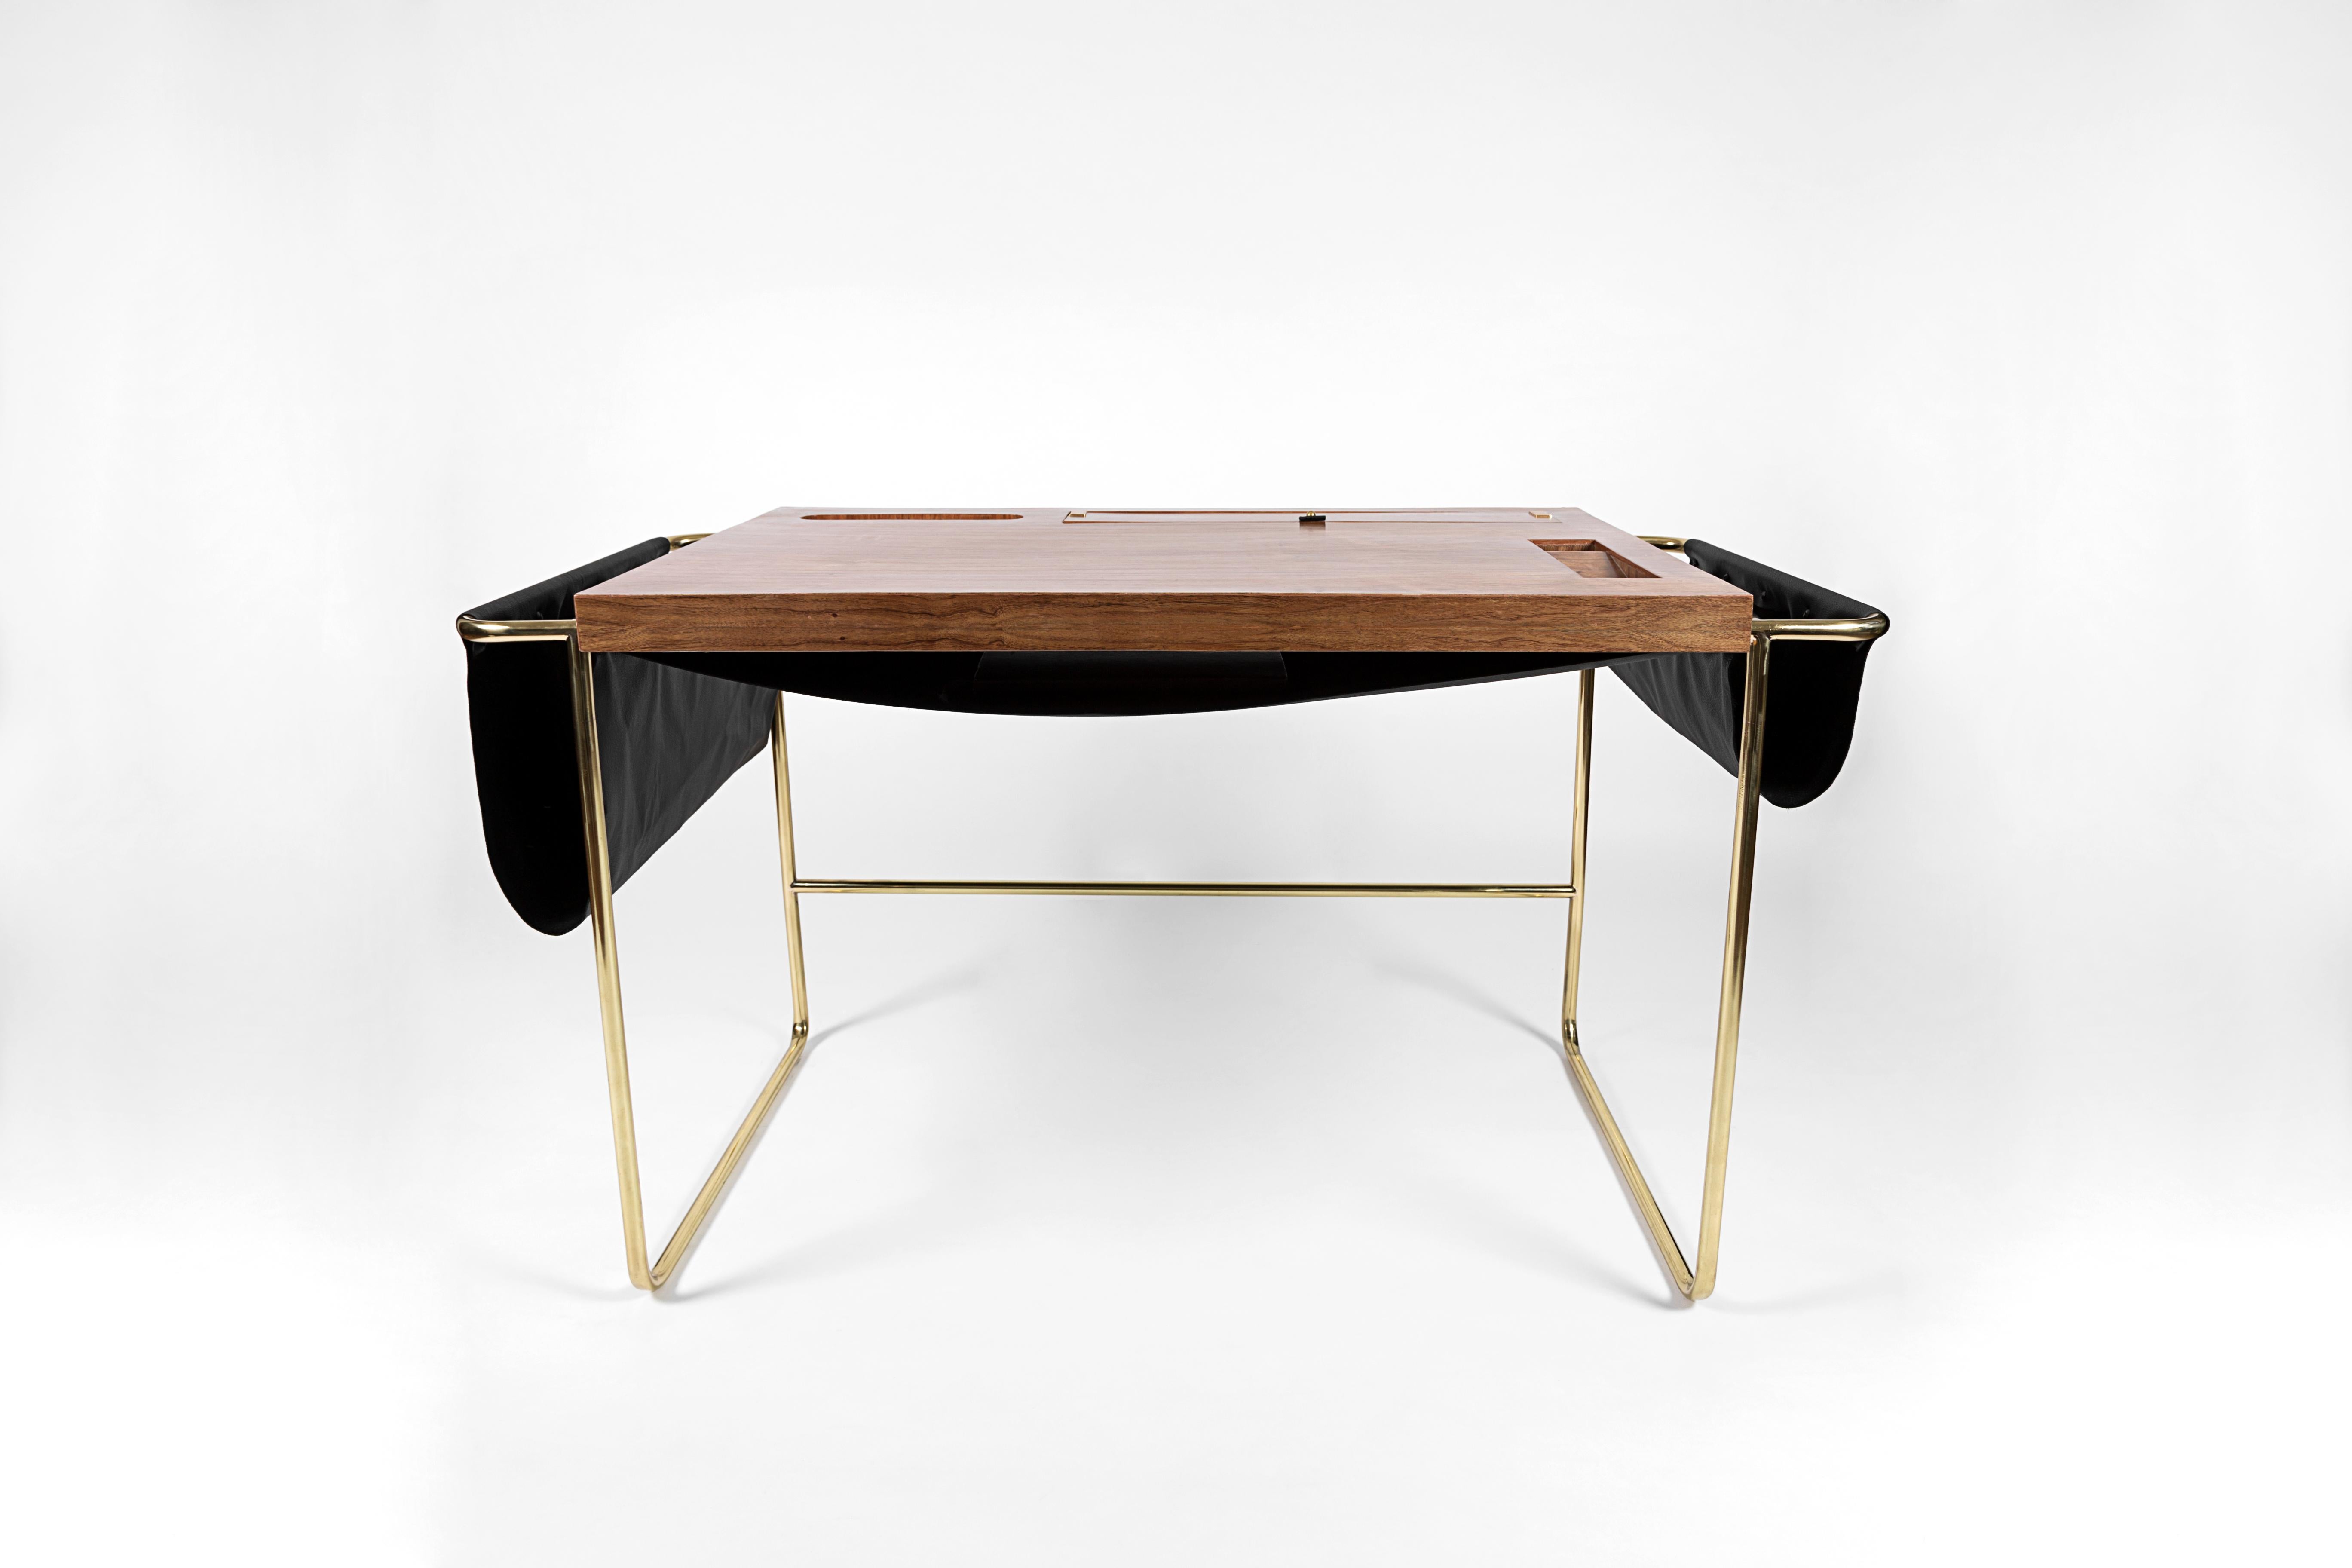 Casablanca desk by Nomade Atelier
Dimensions: D130 x W60 x H73 cm
Material: Brass, Walnut, Leather.
Available in black leather. For others finishes,

A striking balance between sharp edges and soft leather pocketing is found in the Casablanca desk